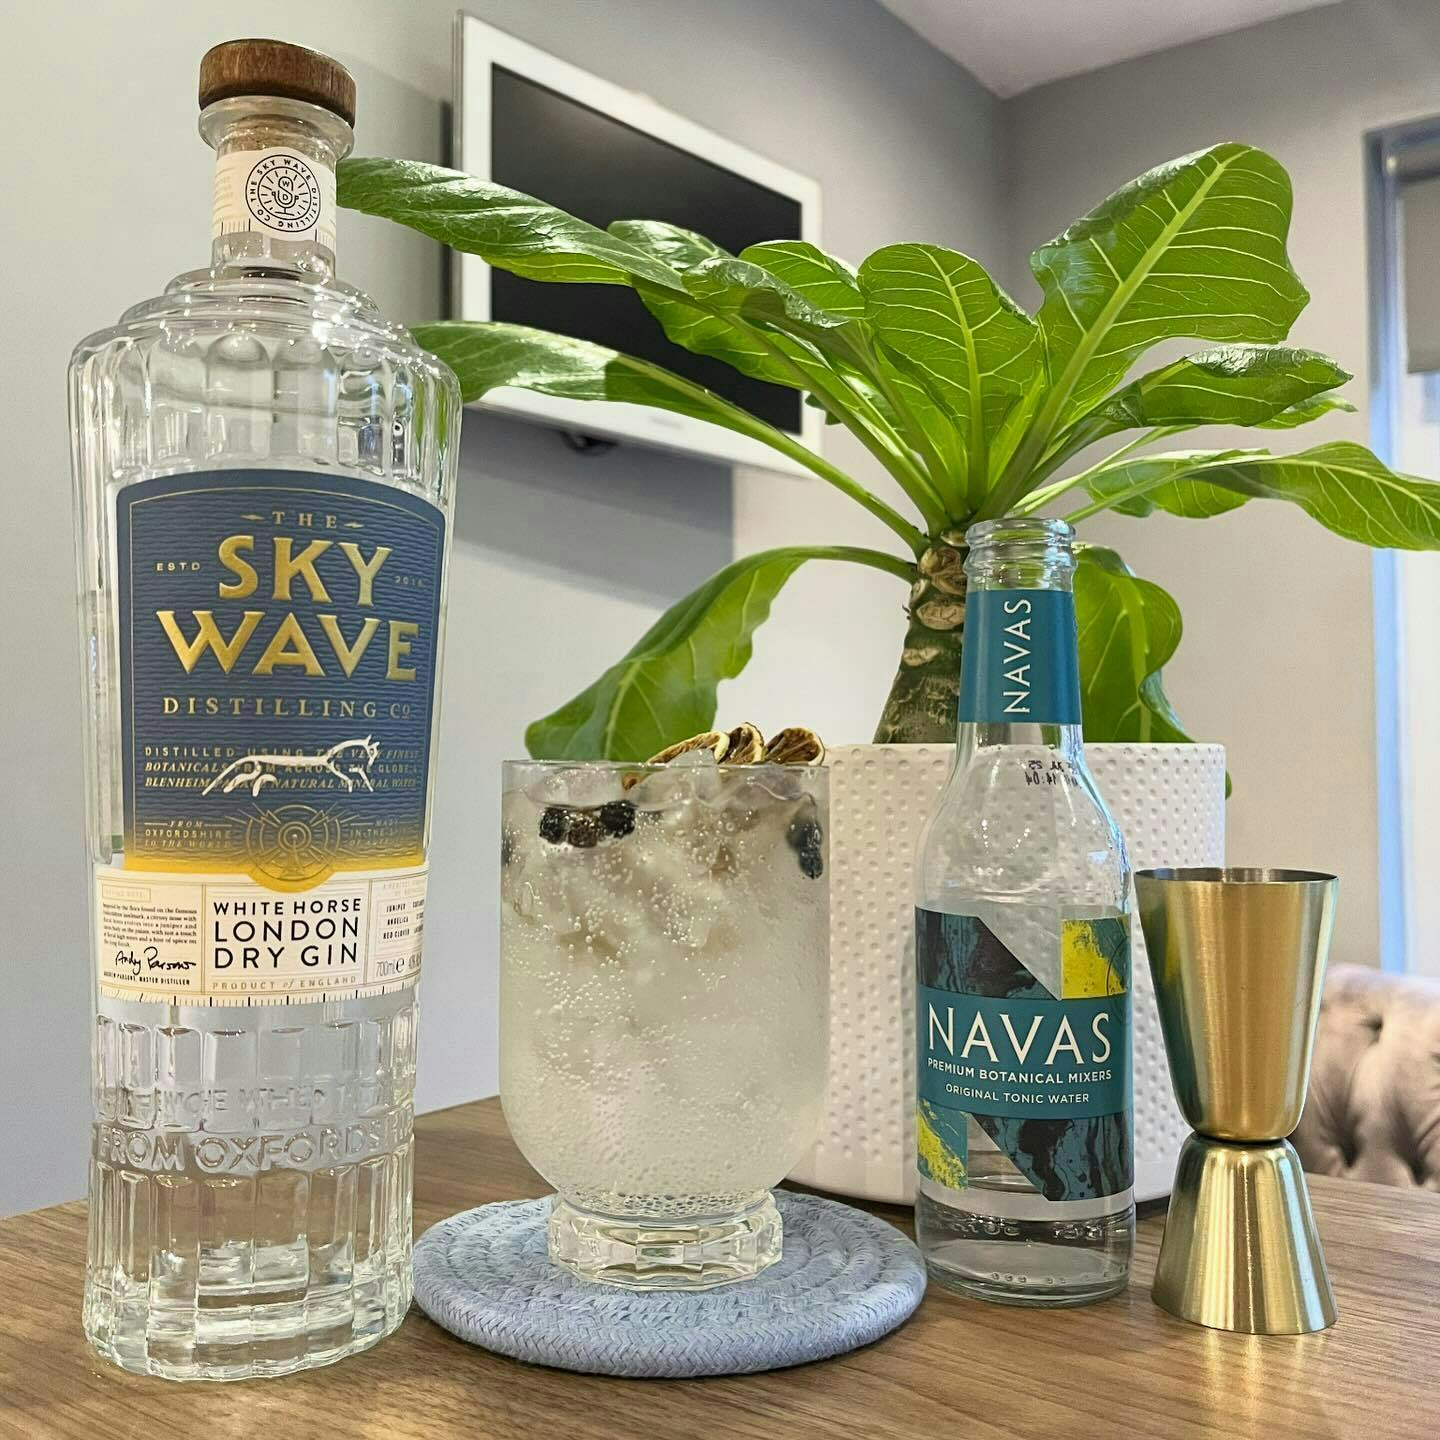 A bottle of Sky Wave Gin next to a gin and tonic and bottle of Navas tonic with an indoor plant in the background